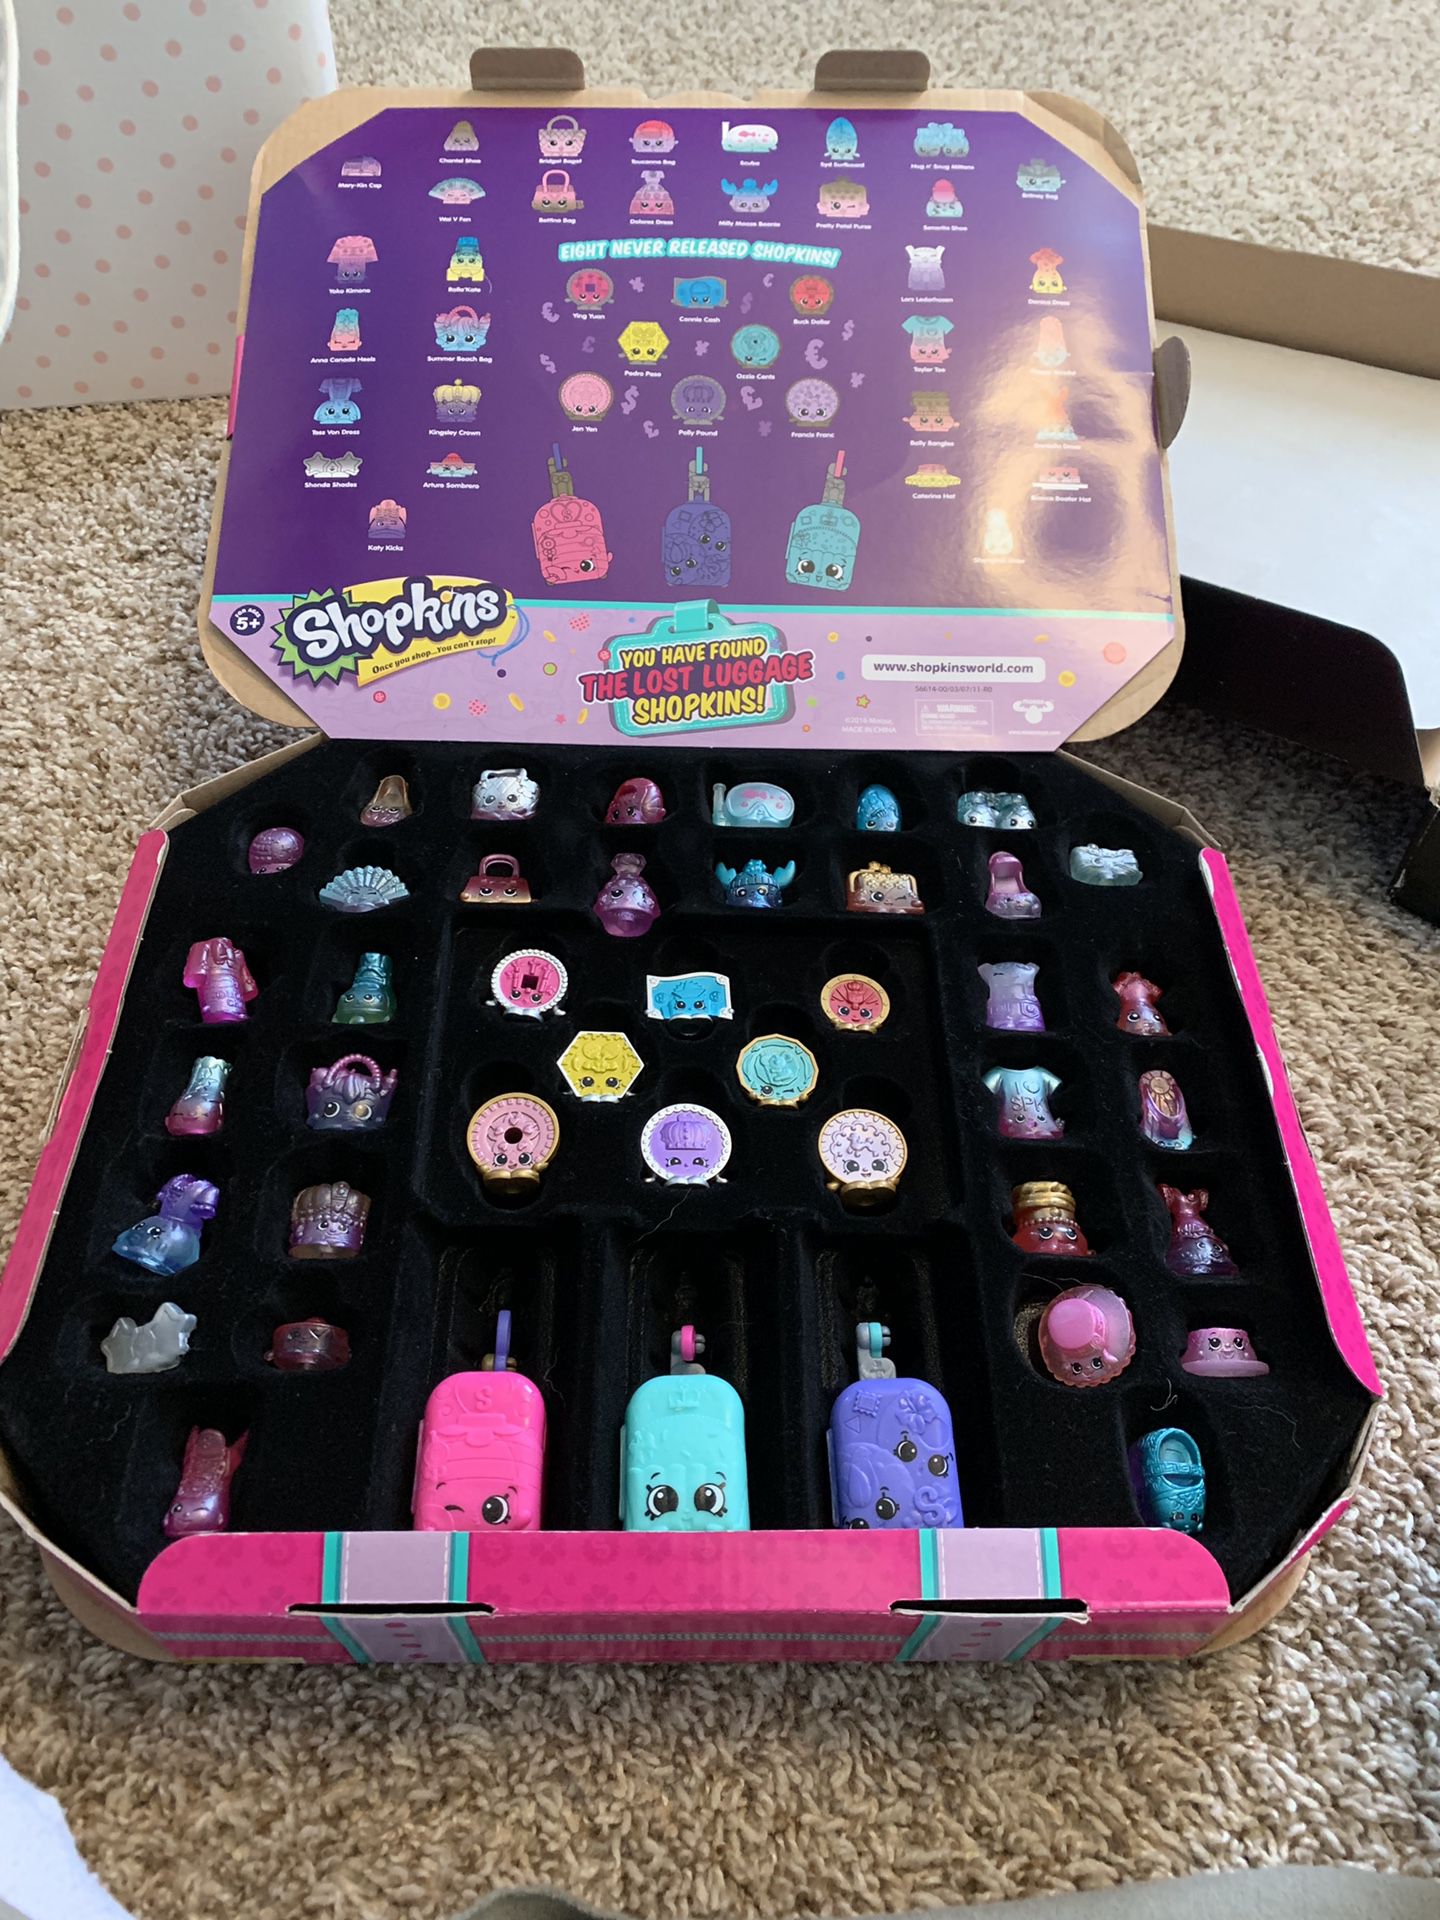 Shopkins limited addition luggage! Perfect